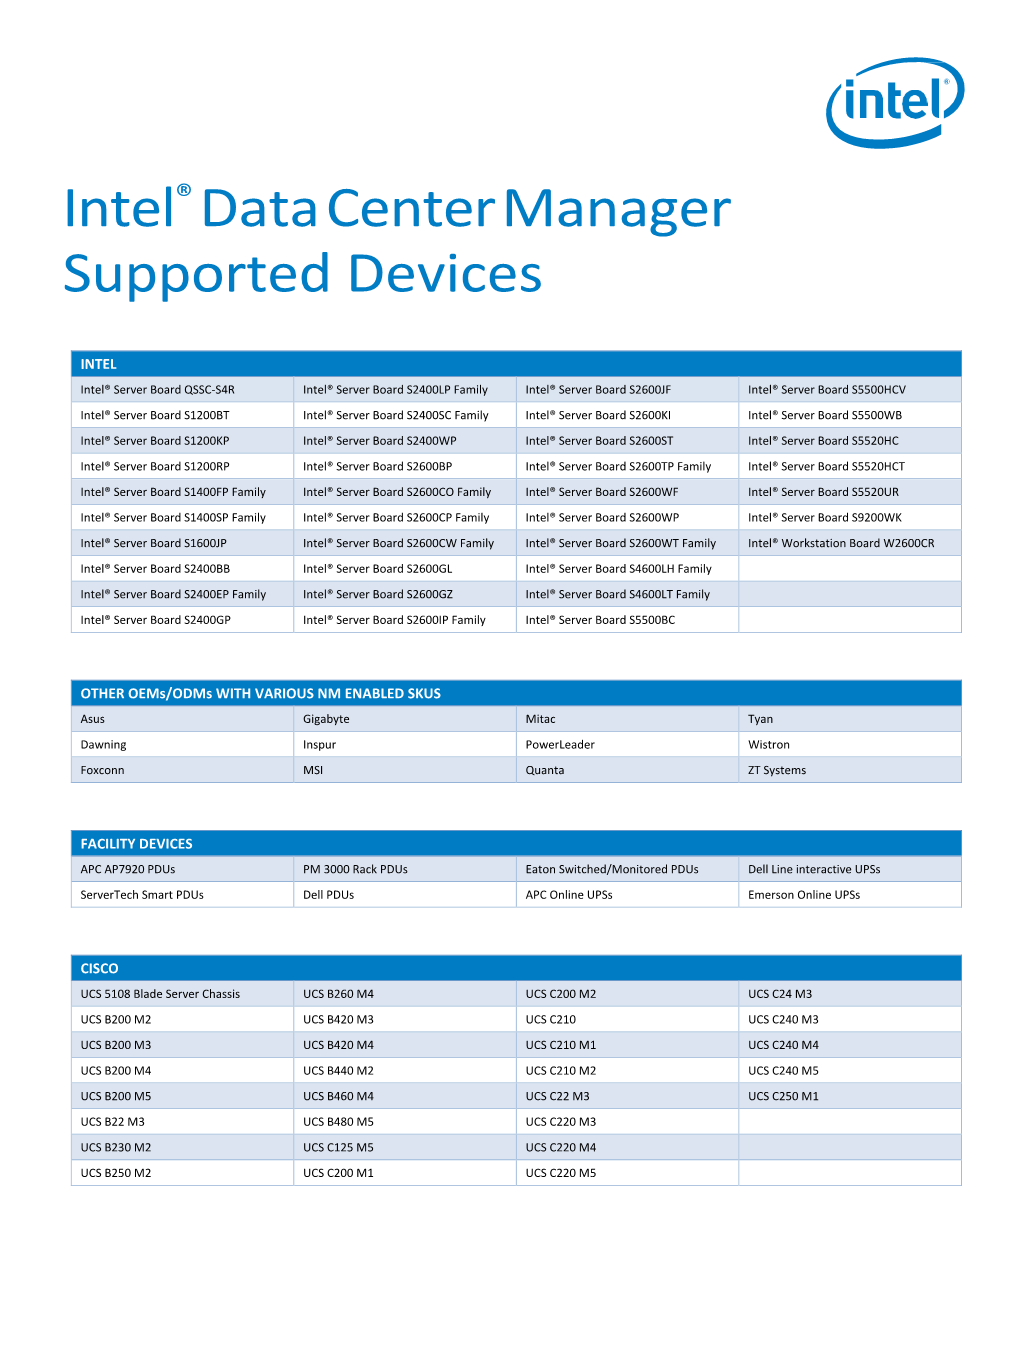 Intel® Data Center Manager Supported Devices